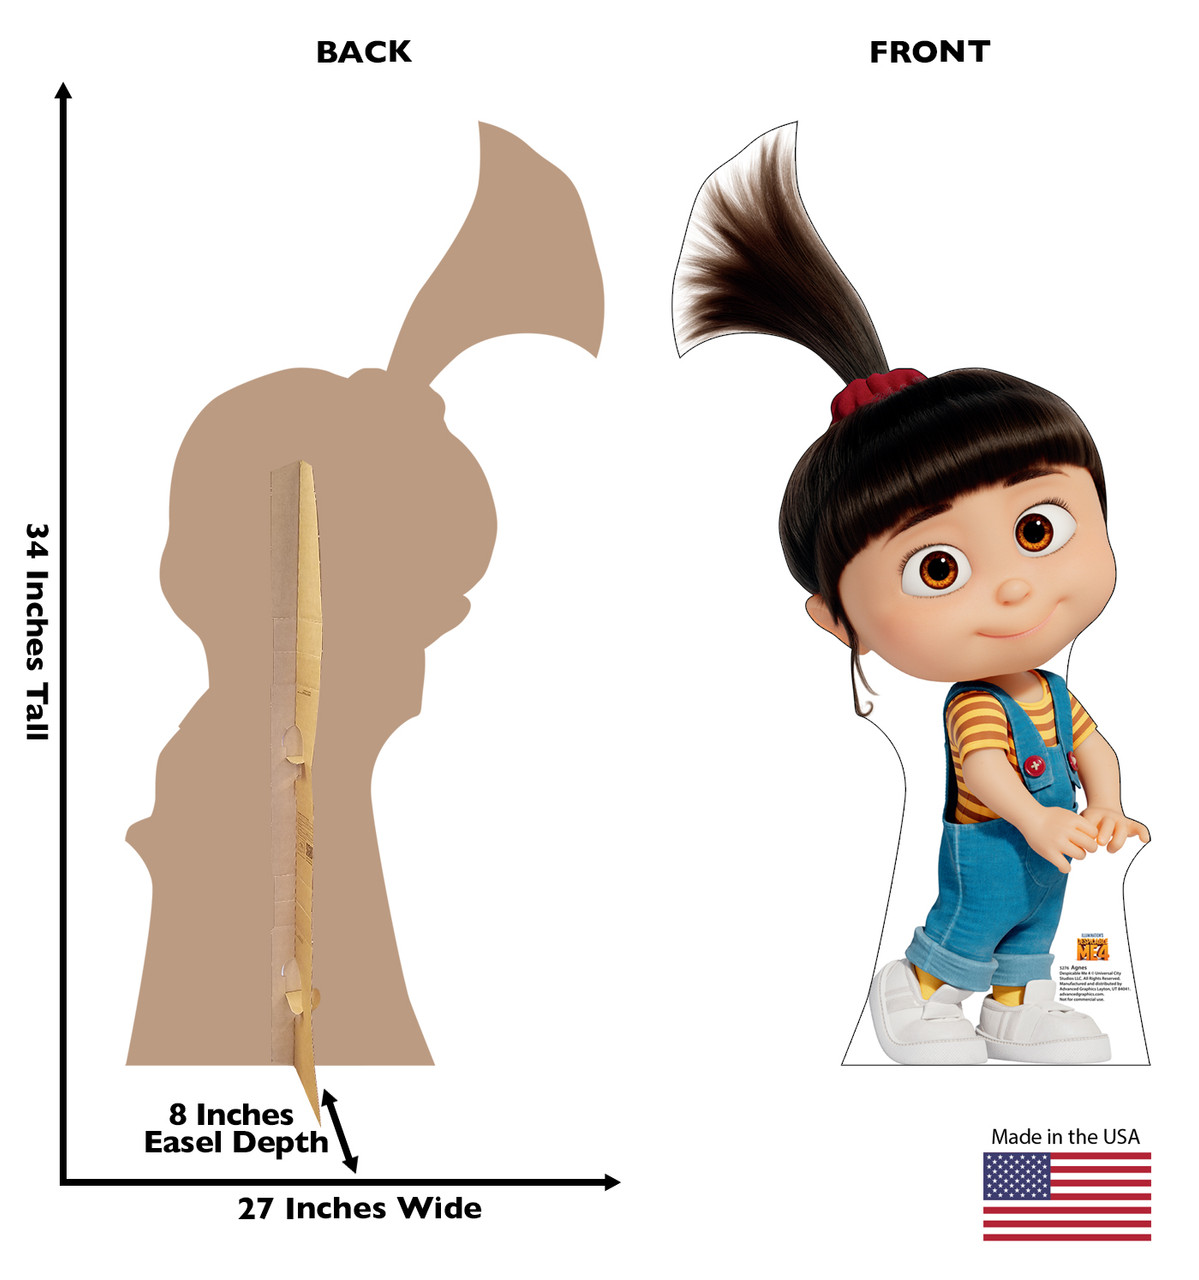 Life-size cardboard standee of Agnes with back and front dimensions.